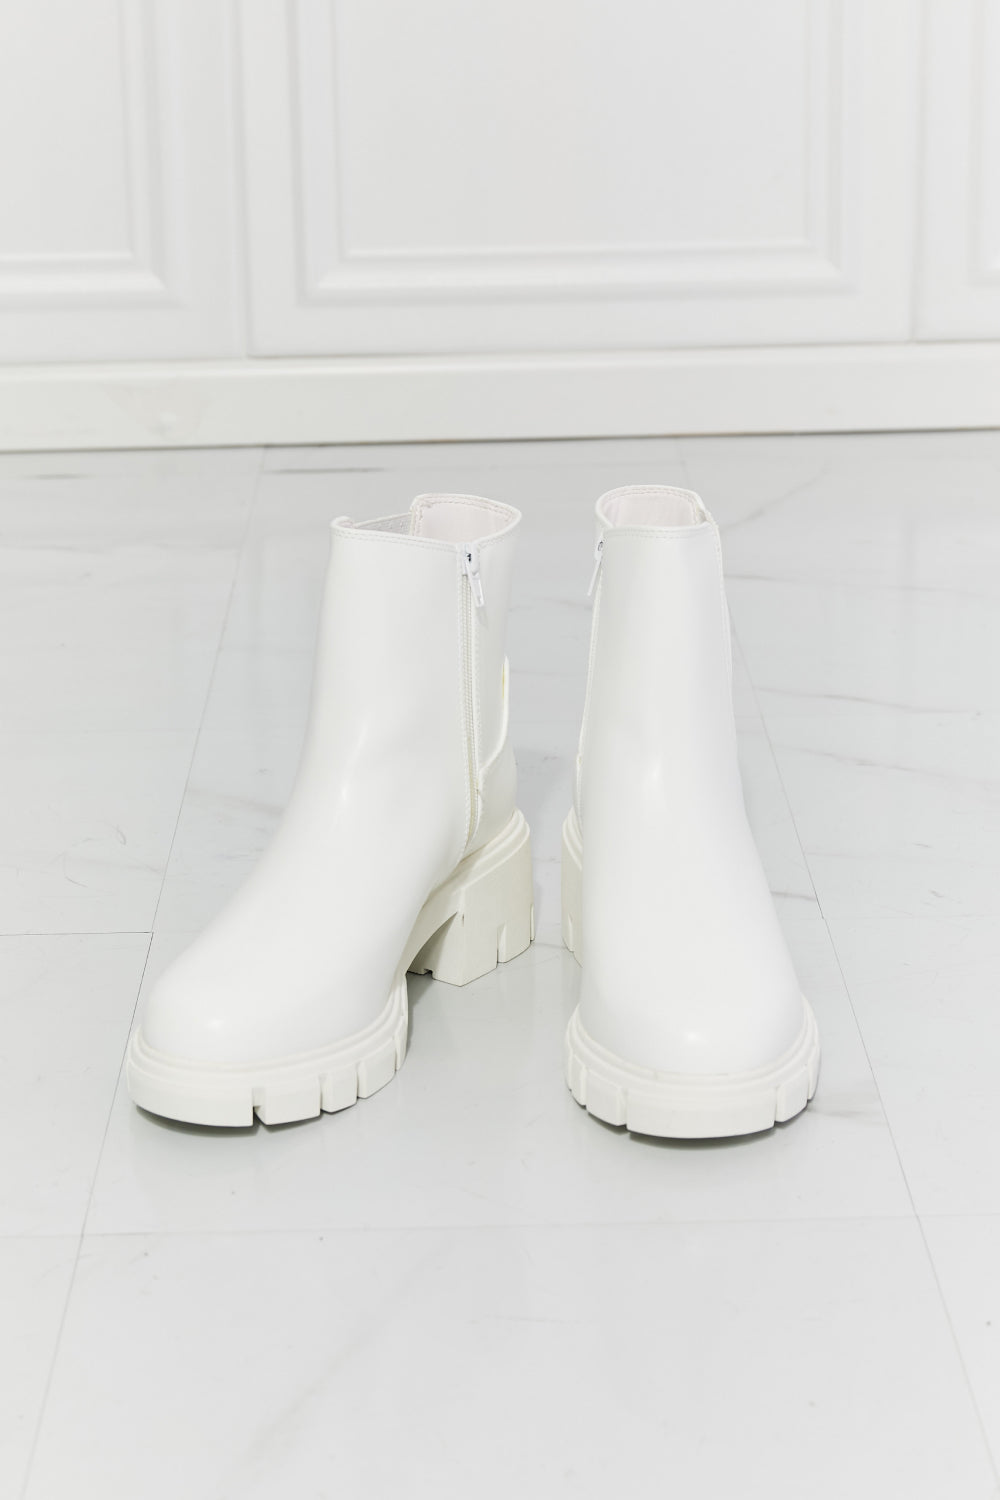 MMShoes What It Takes Lug Sole Chelsea Boots in White - Tigbul's Fashion